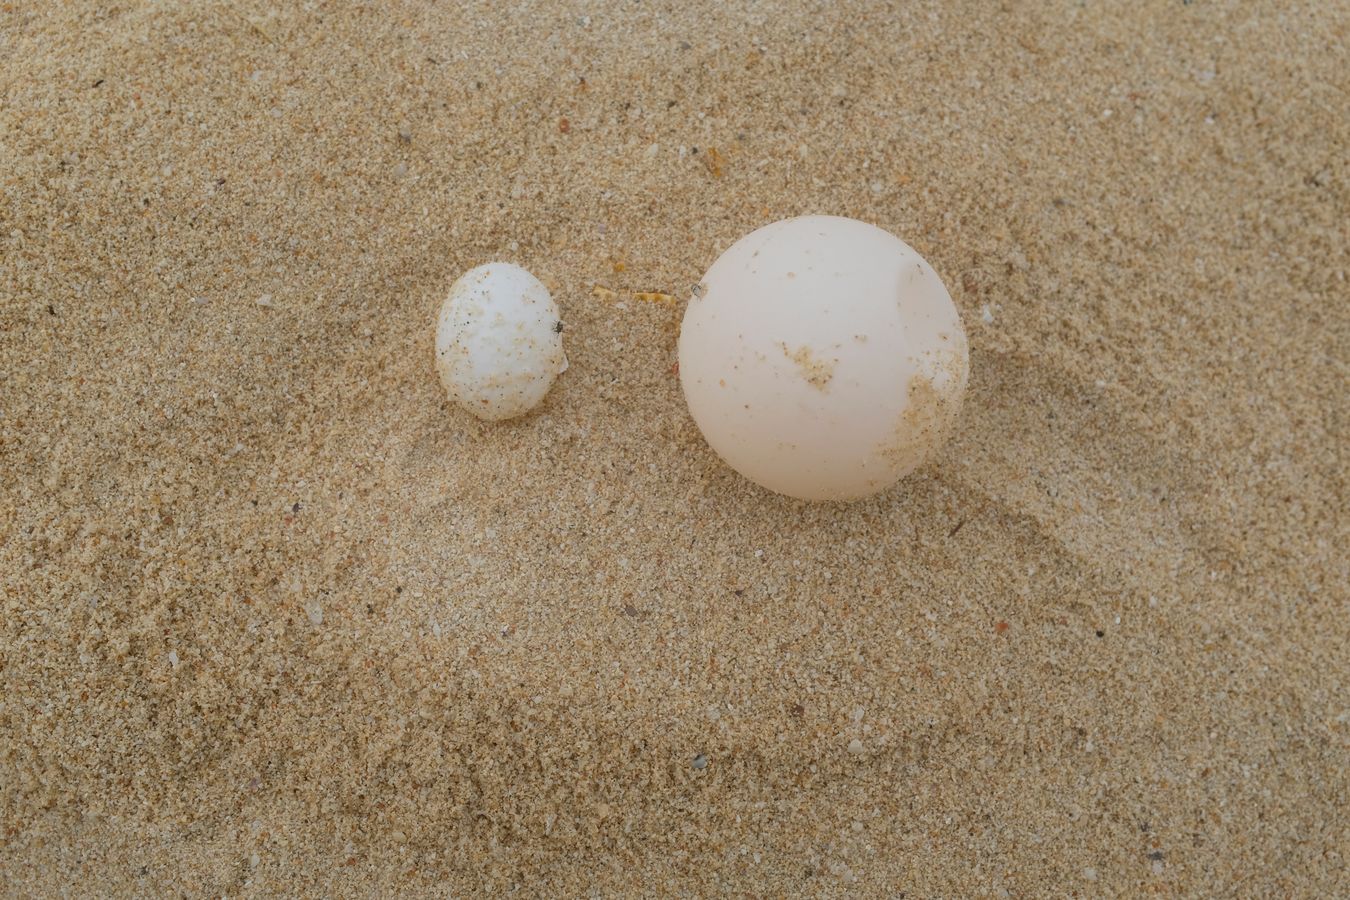 Small oval green turtle egg next to a normal egg.